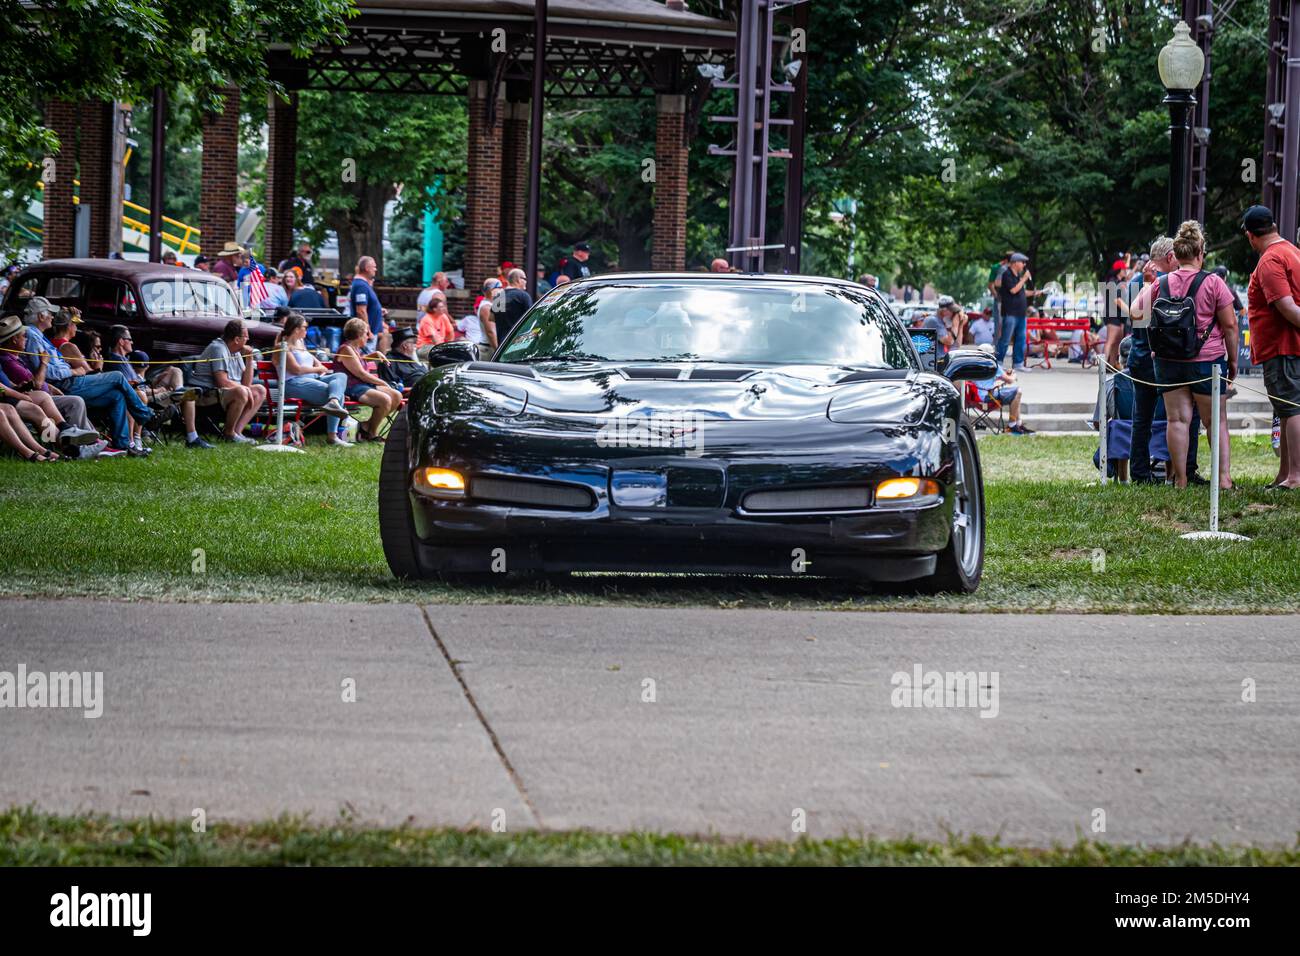 Des Moines, IA - July 03, 2022: Wide angle front view of a 2004 Chevrolet Corvette C5 Z06 at a local car show. Stock Photo